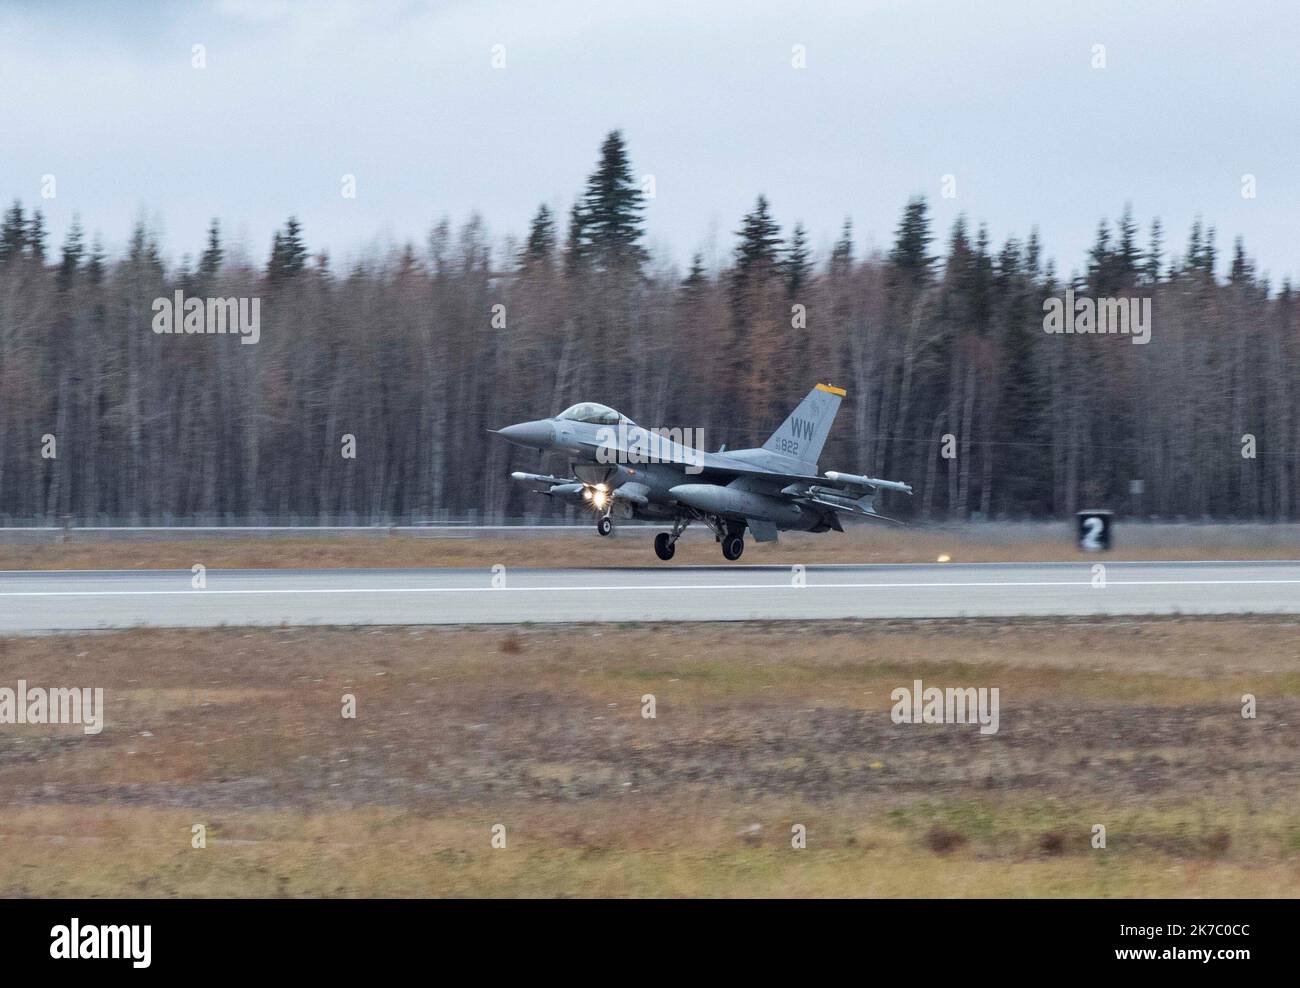 An F-16 Fighting Falcon assigned to the 35th Fighter Wing lands at Eielson Air Force Base, Alaska, during RED FLAG-Alaska (RF-A) 23-1, Oct. 8, 2022. RF-A employs the 18th Aggressor Squadron in simulating combat with the participating members to share its knowledge of adversarial tactics, techniques and procedures. (U.S. Air Force photo by Senior Airman Joao Marcus Costa) Stock Photo